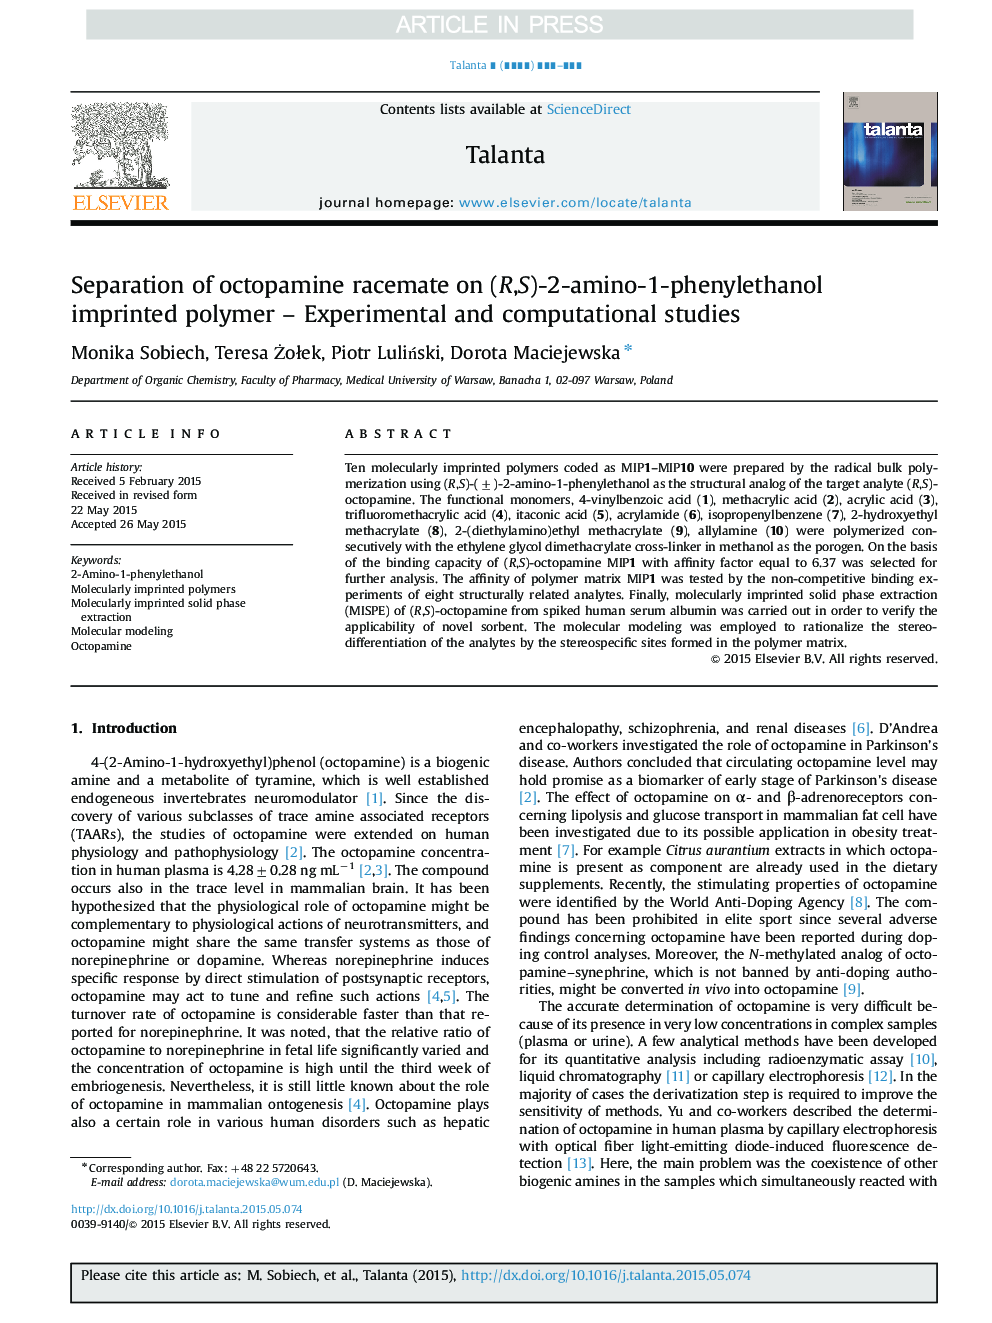 Separation of octopamine racemate on (R,S)-2-amino-1-phenylethanol imprinted polymer - Experimental and computational studies